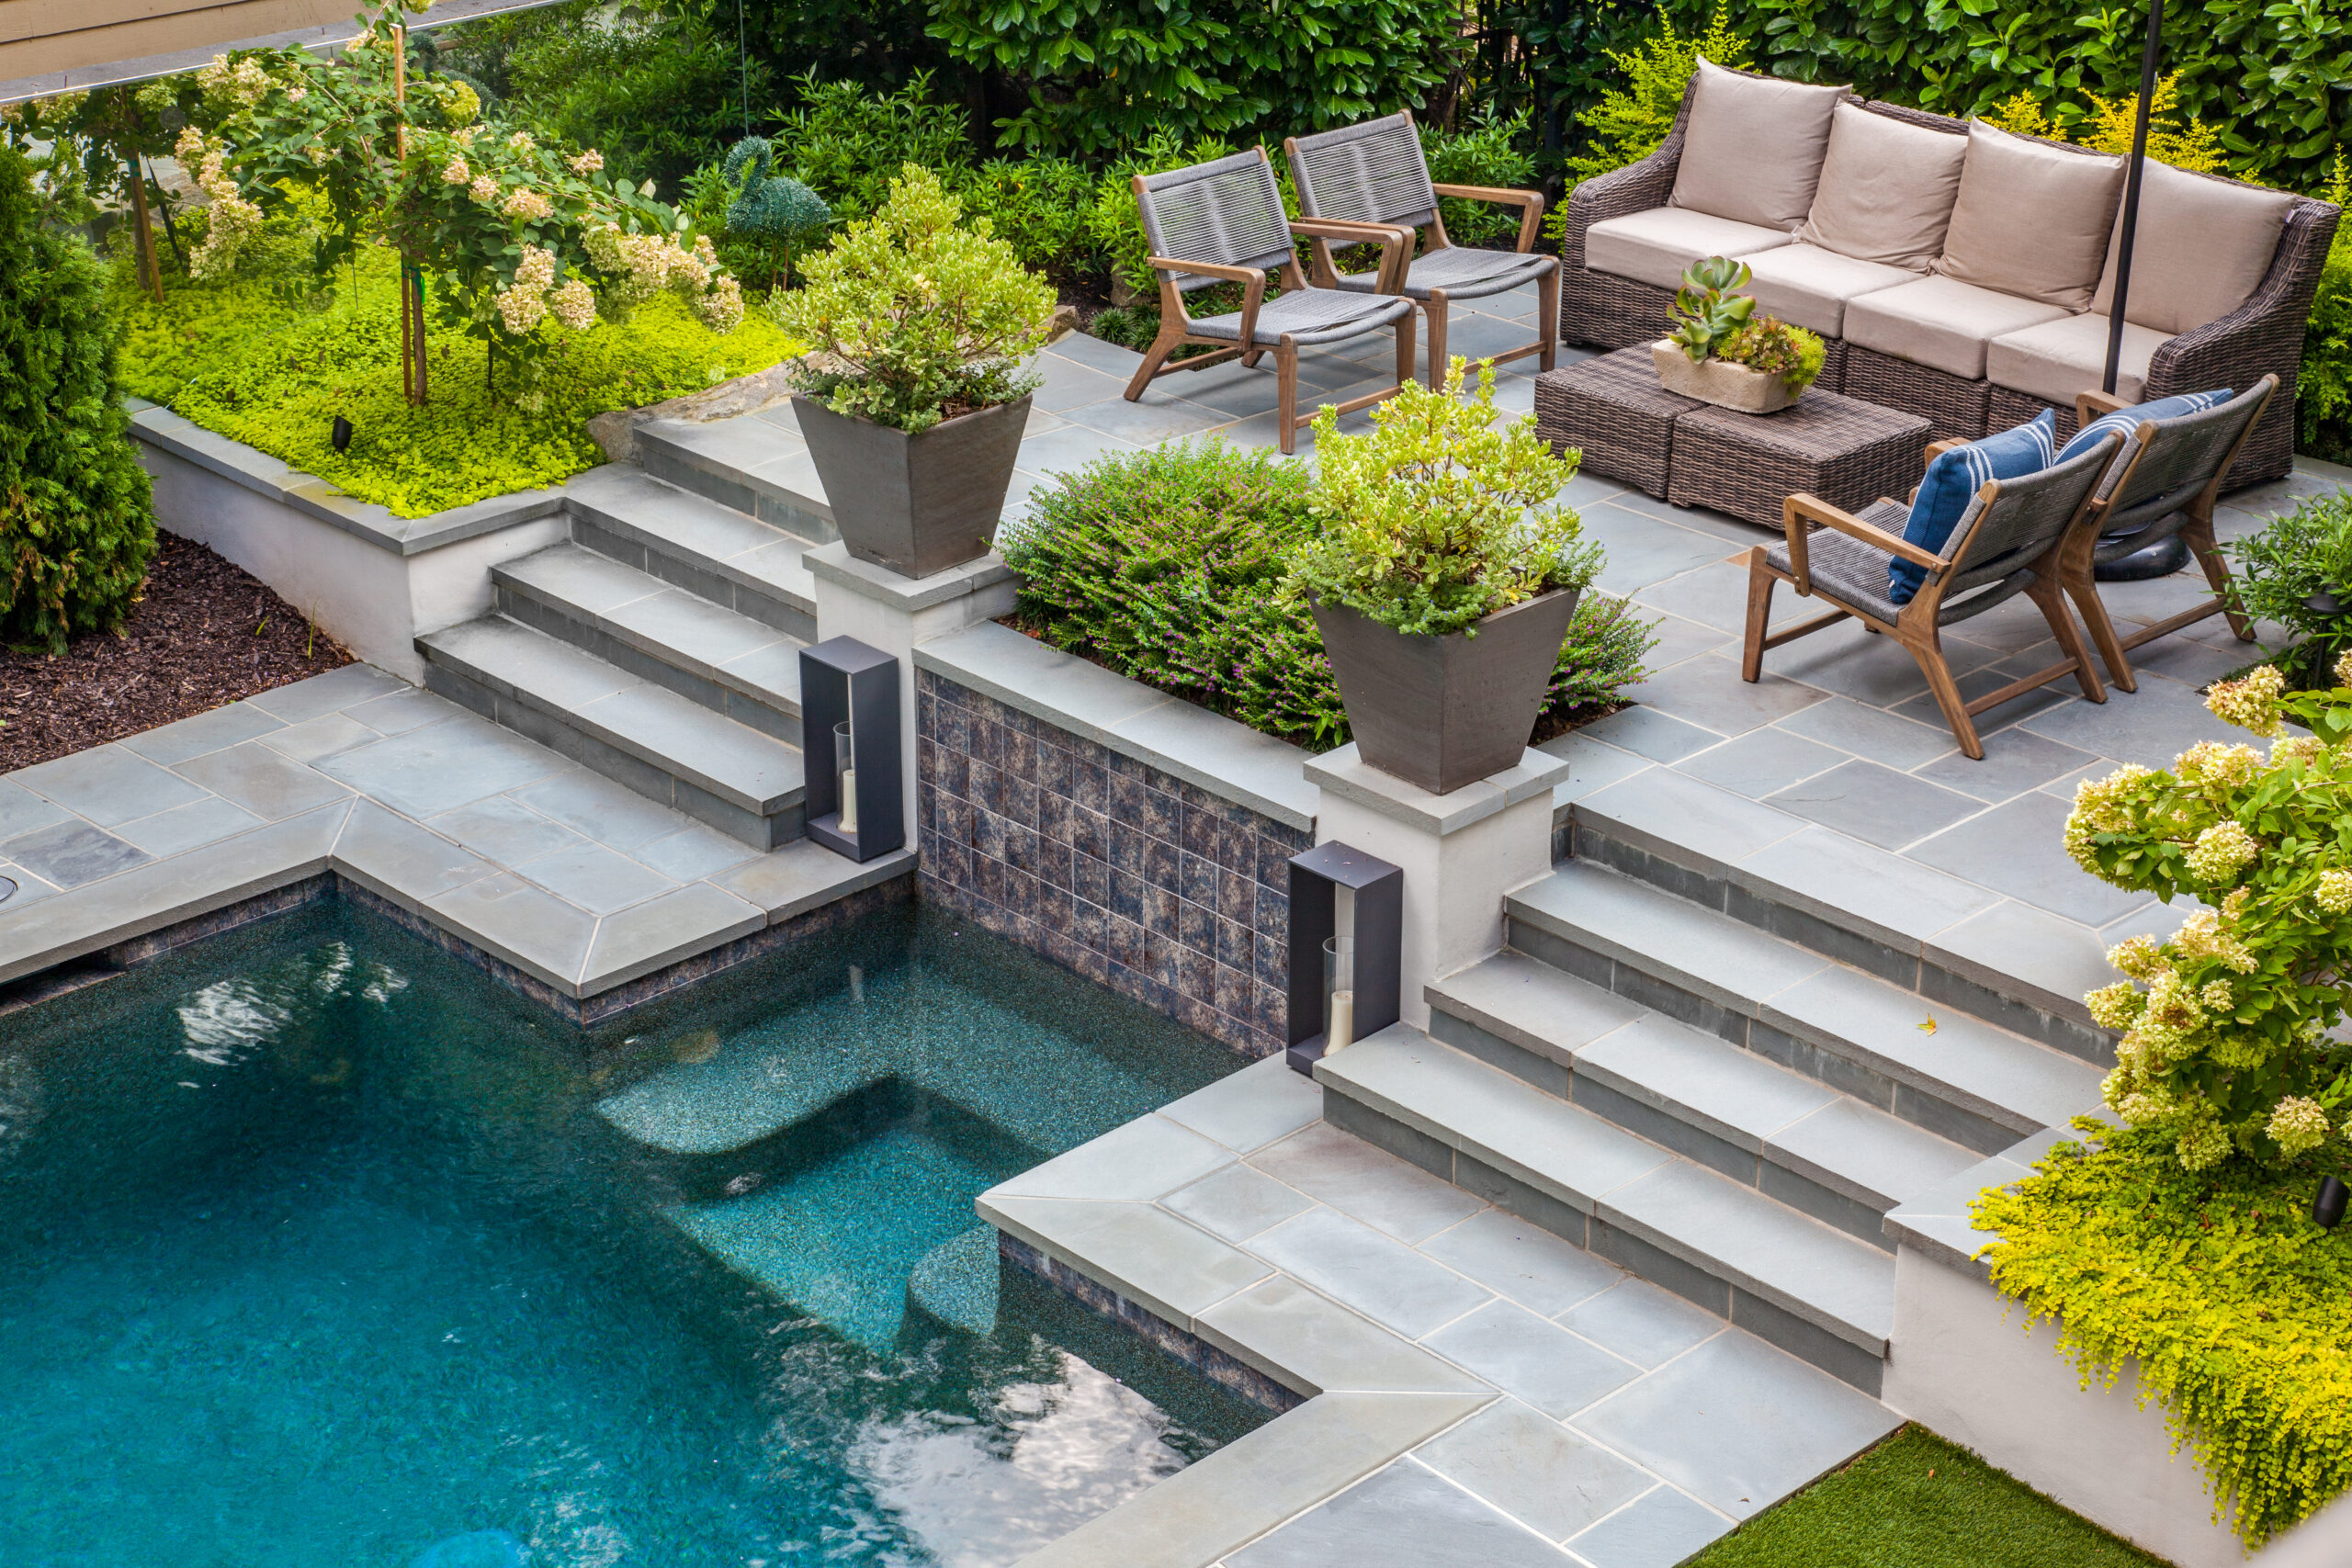 an overhead shot of an outdoor seating area on a raised terrace paved with stone slabs a few steps above a custom pool